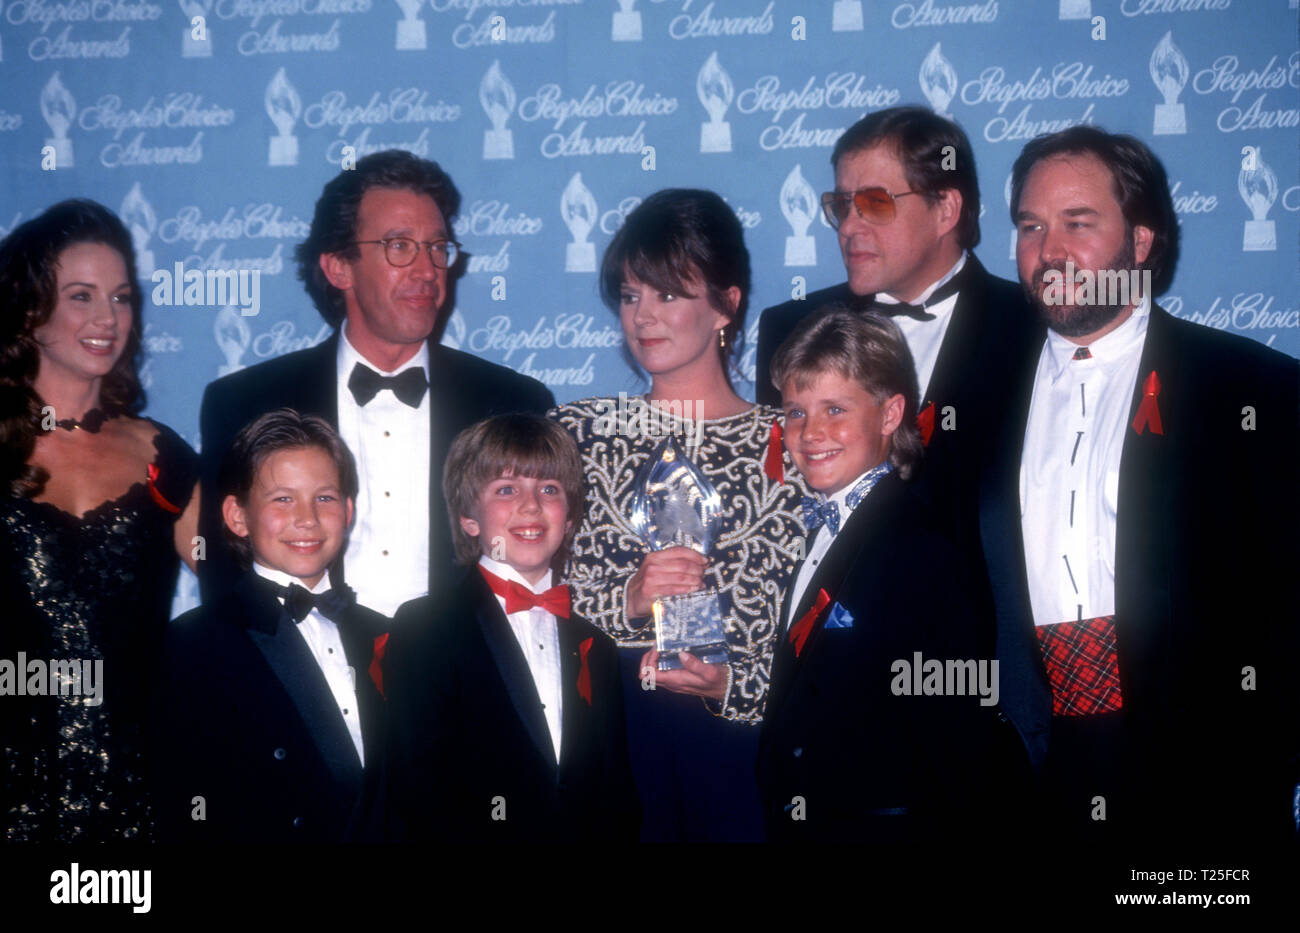 CULVER CITY, CA - MARCH 8: (L-R) Actress Debbe Dunning, actor Jonathan Taylor Thomas, actor Tim Allen, actor Taran Noah Smith, actress Patricia Richardson, actor Zachery Ty Bryan, actor Earl Hindman and actor Richard Karn attend the 20th Annual People's Choice Awards on March 8, 1994 at Sony Picture Studios in Culver City, California. Photo by Barry King/Alamy Stock Photo Stock Photo